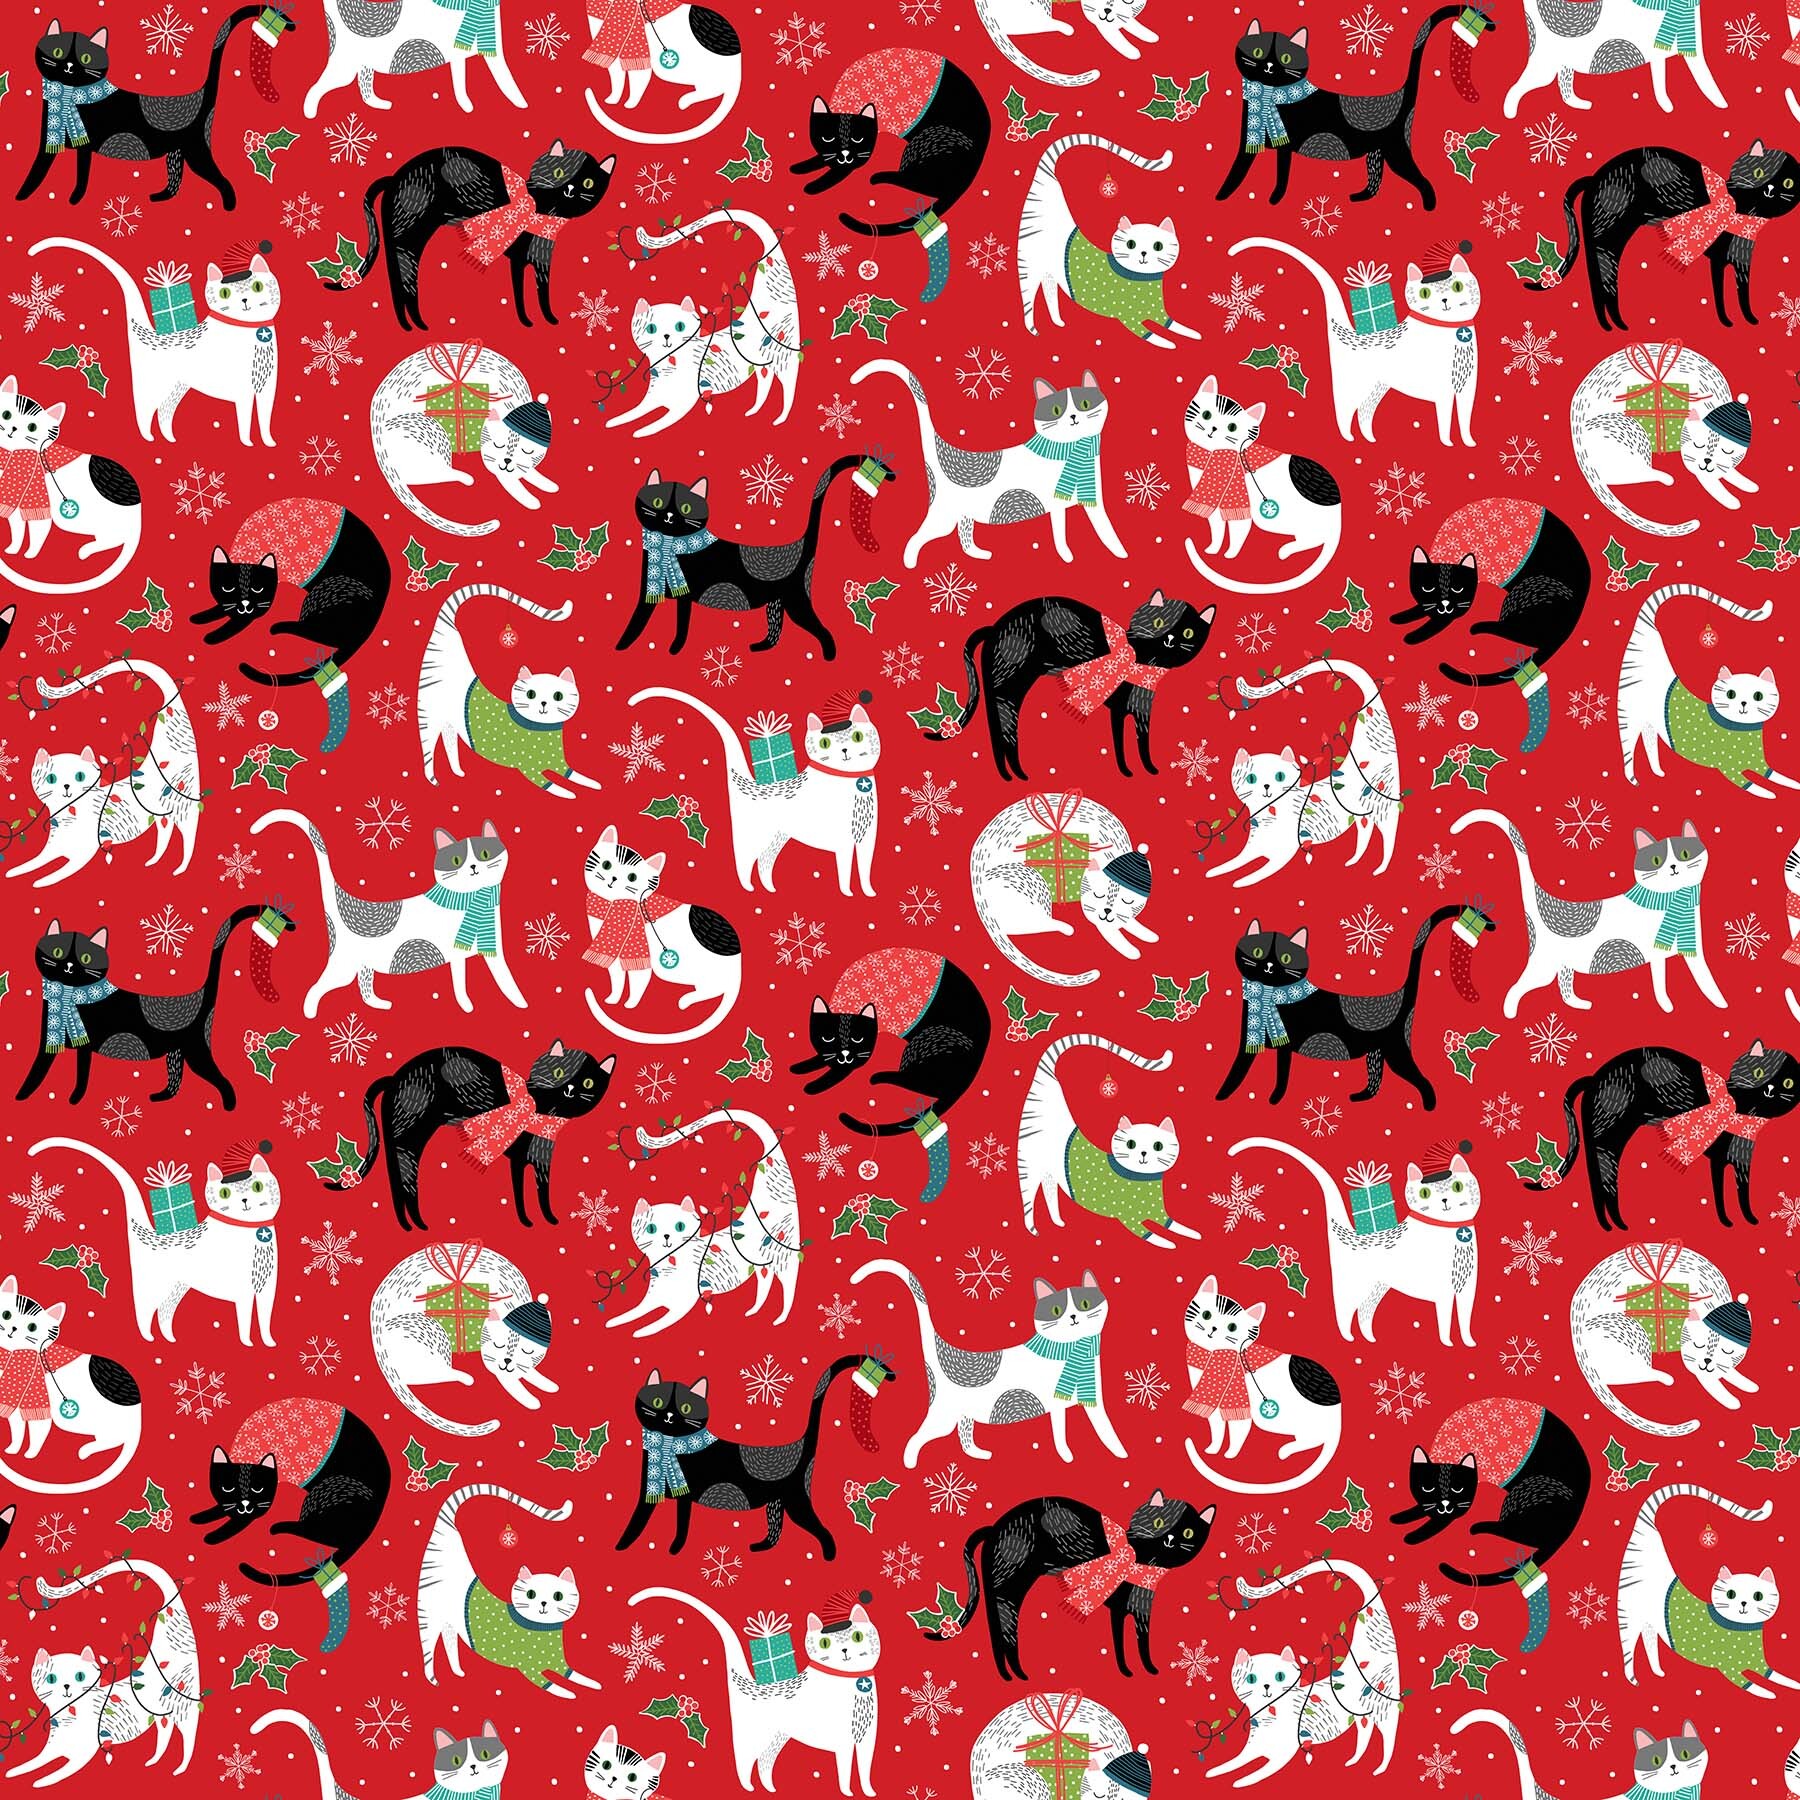 Santa Paws - Red Allover Cats - 1/2m cut 58019